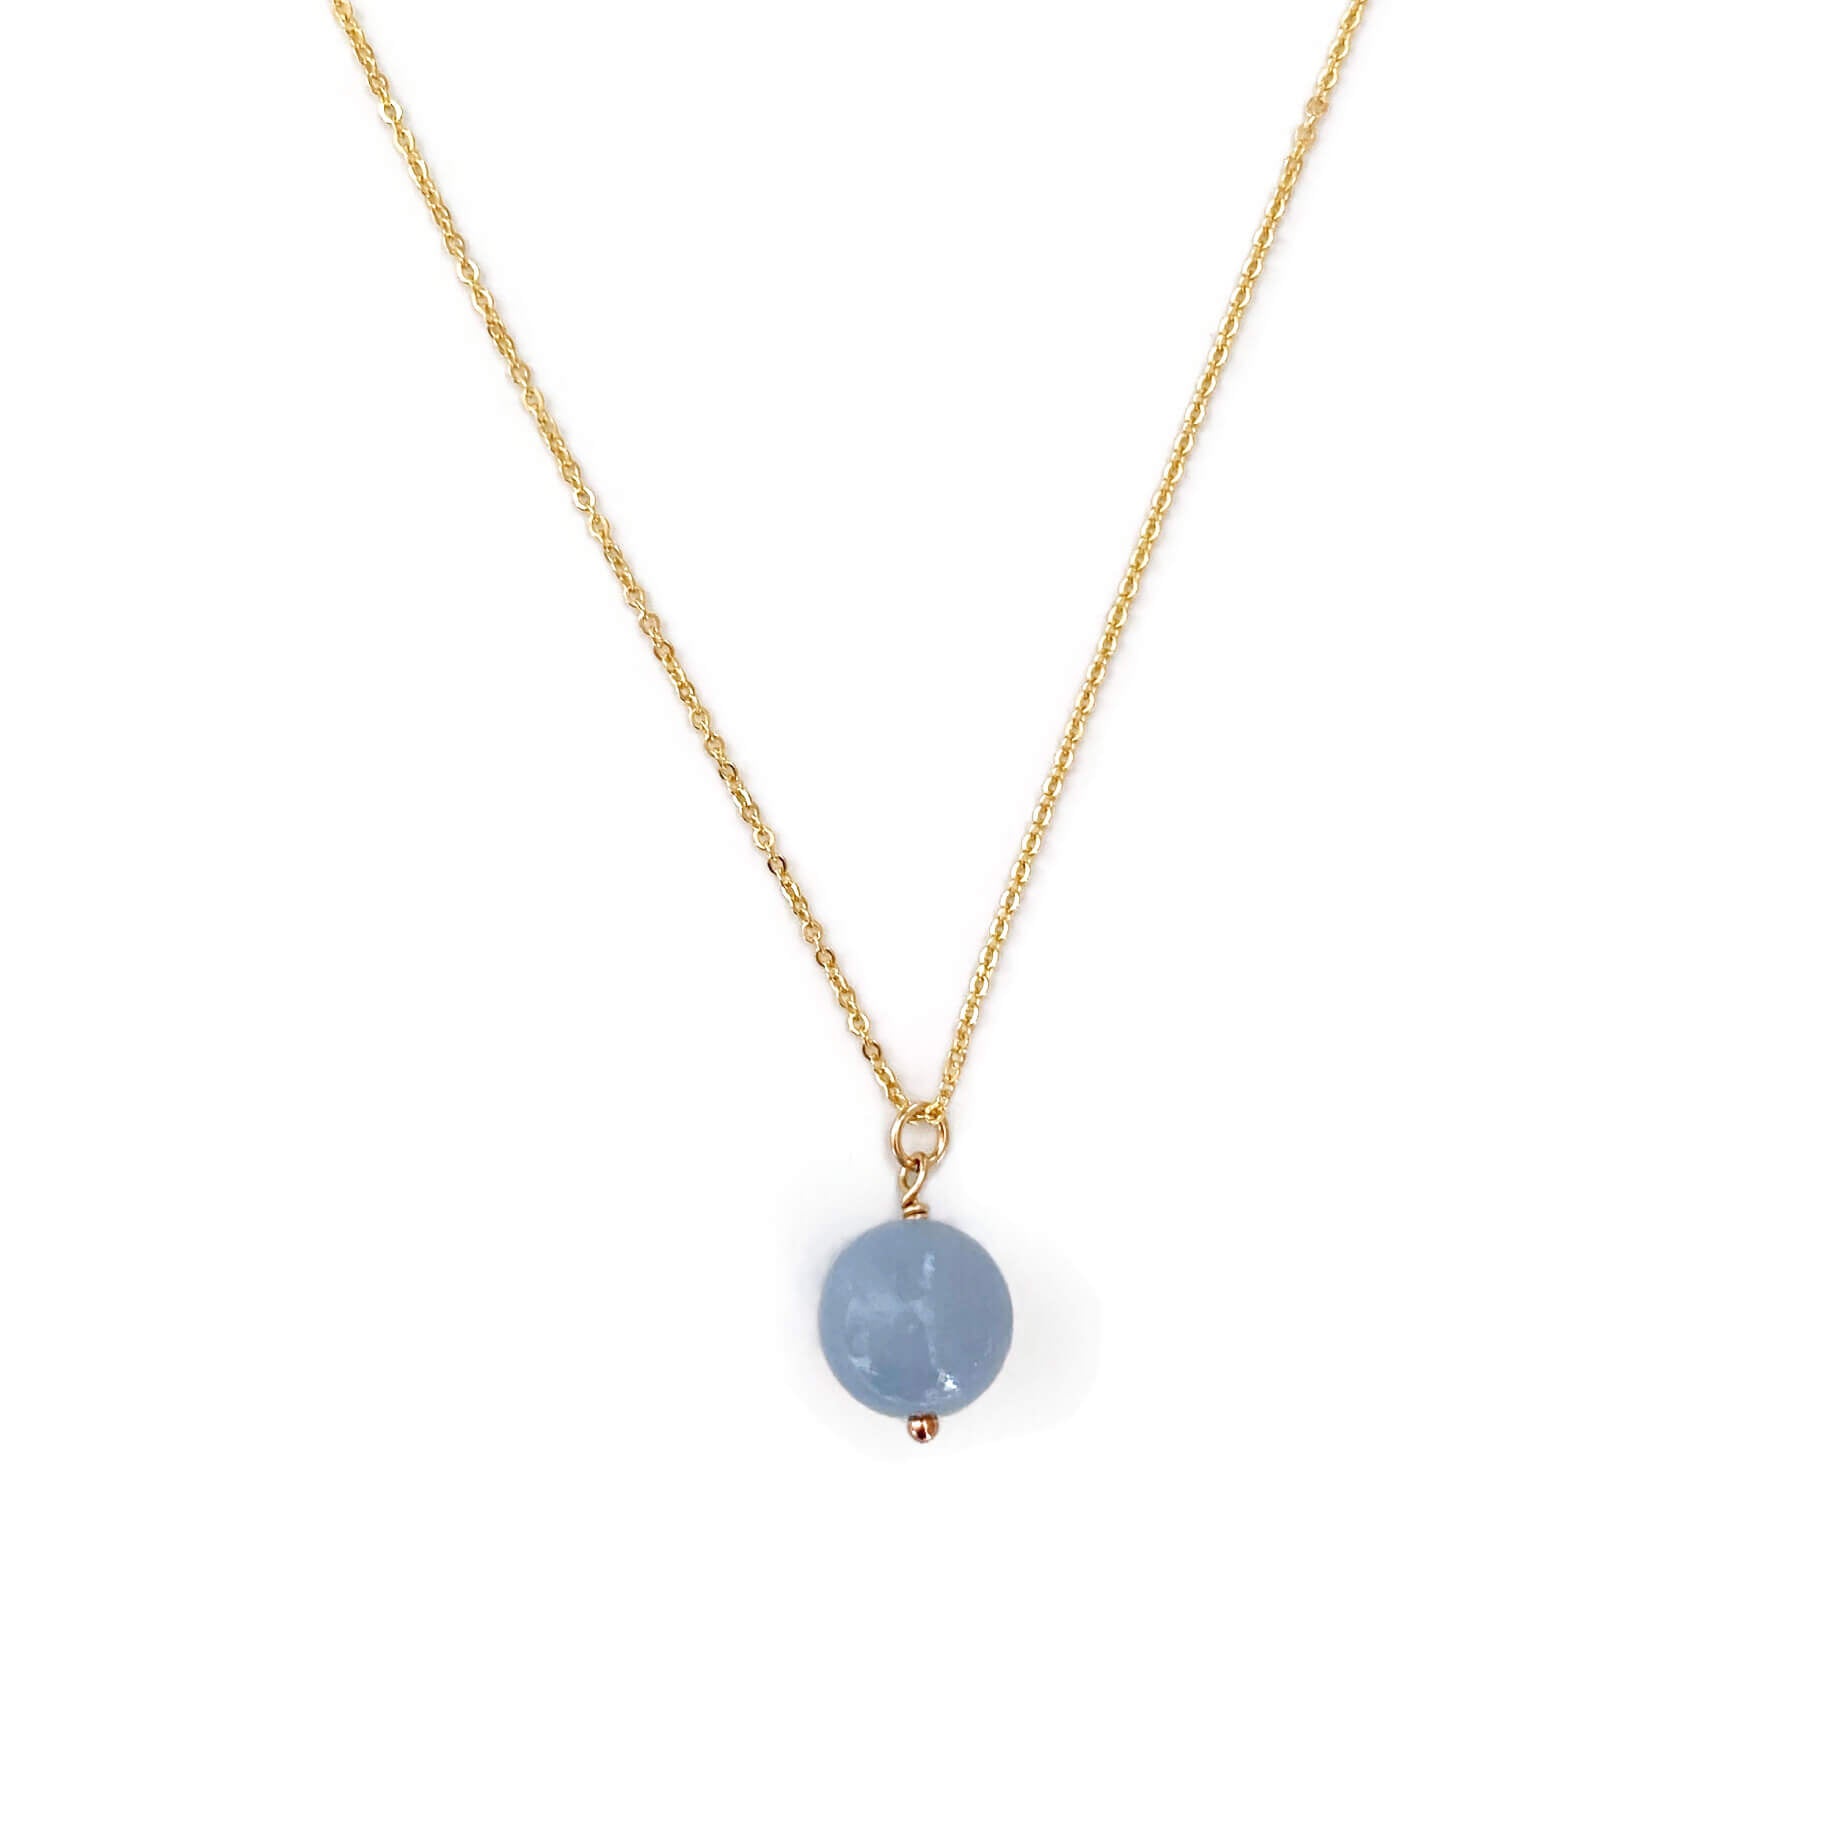 This Angelite necklace is made of genuine Angelite crystal with 14k gold chian